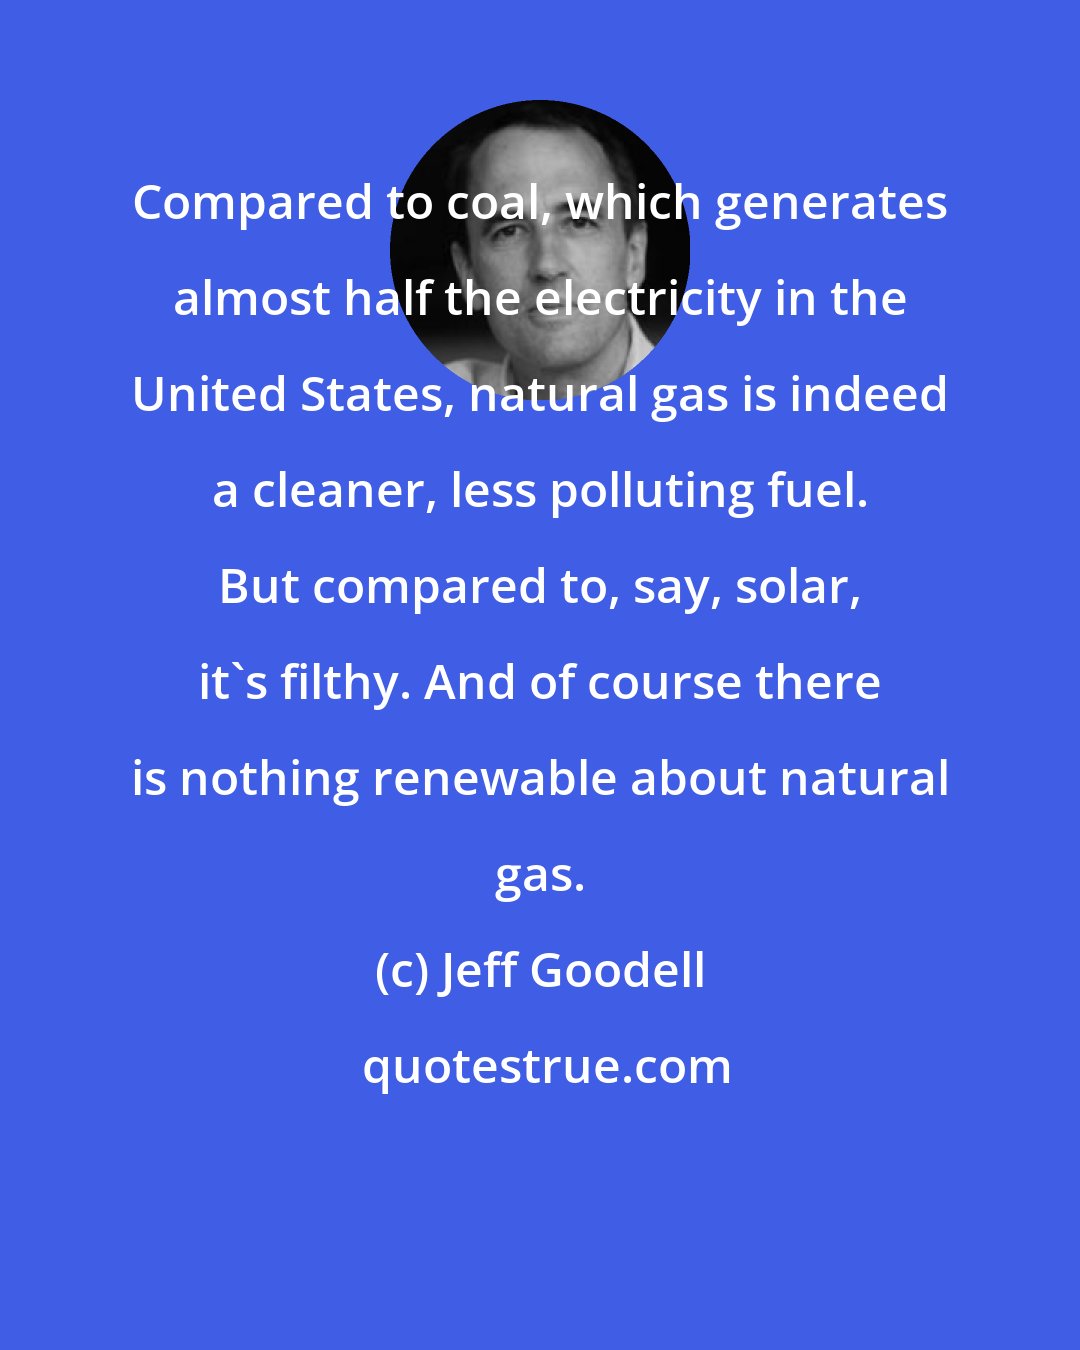 Jeff Goodell: Compared to coal, which generates almost half the electricity in the United States, natural gas is indeed a cleaner, less polluting fuel. But compared to, say, solar, it's filthy. And of course there is nothing renewable about natural gas.